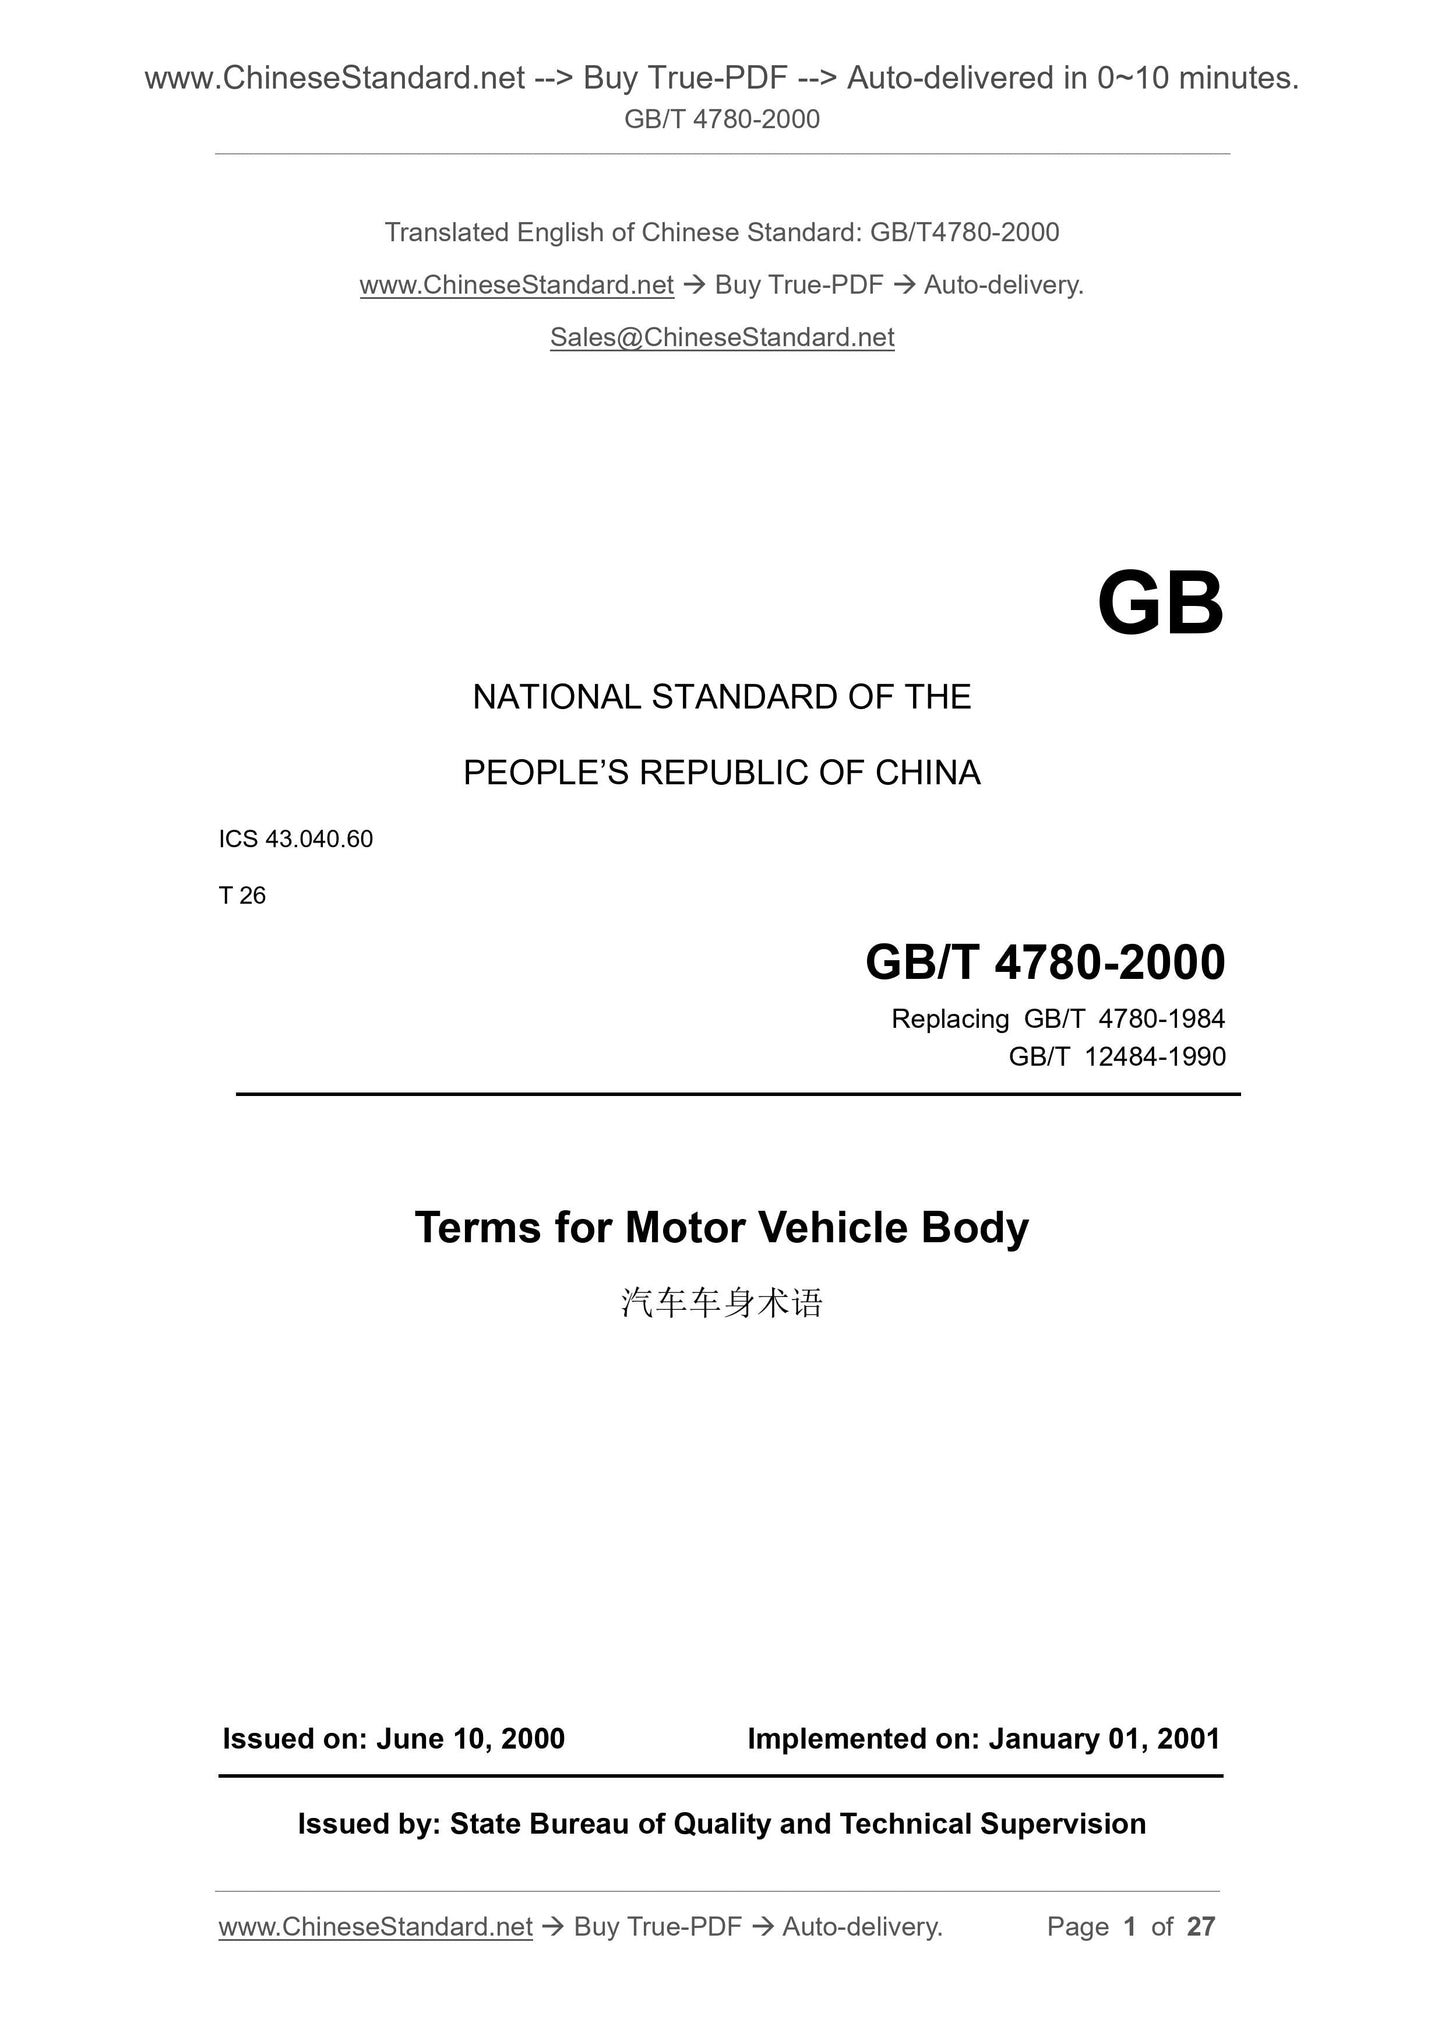 GB/T 4780-2000 Page 1